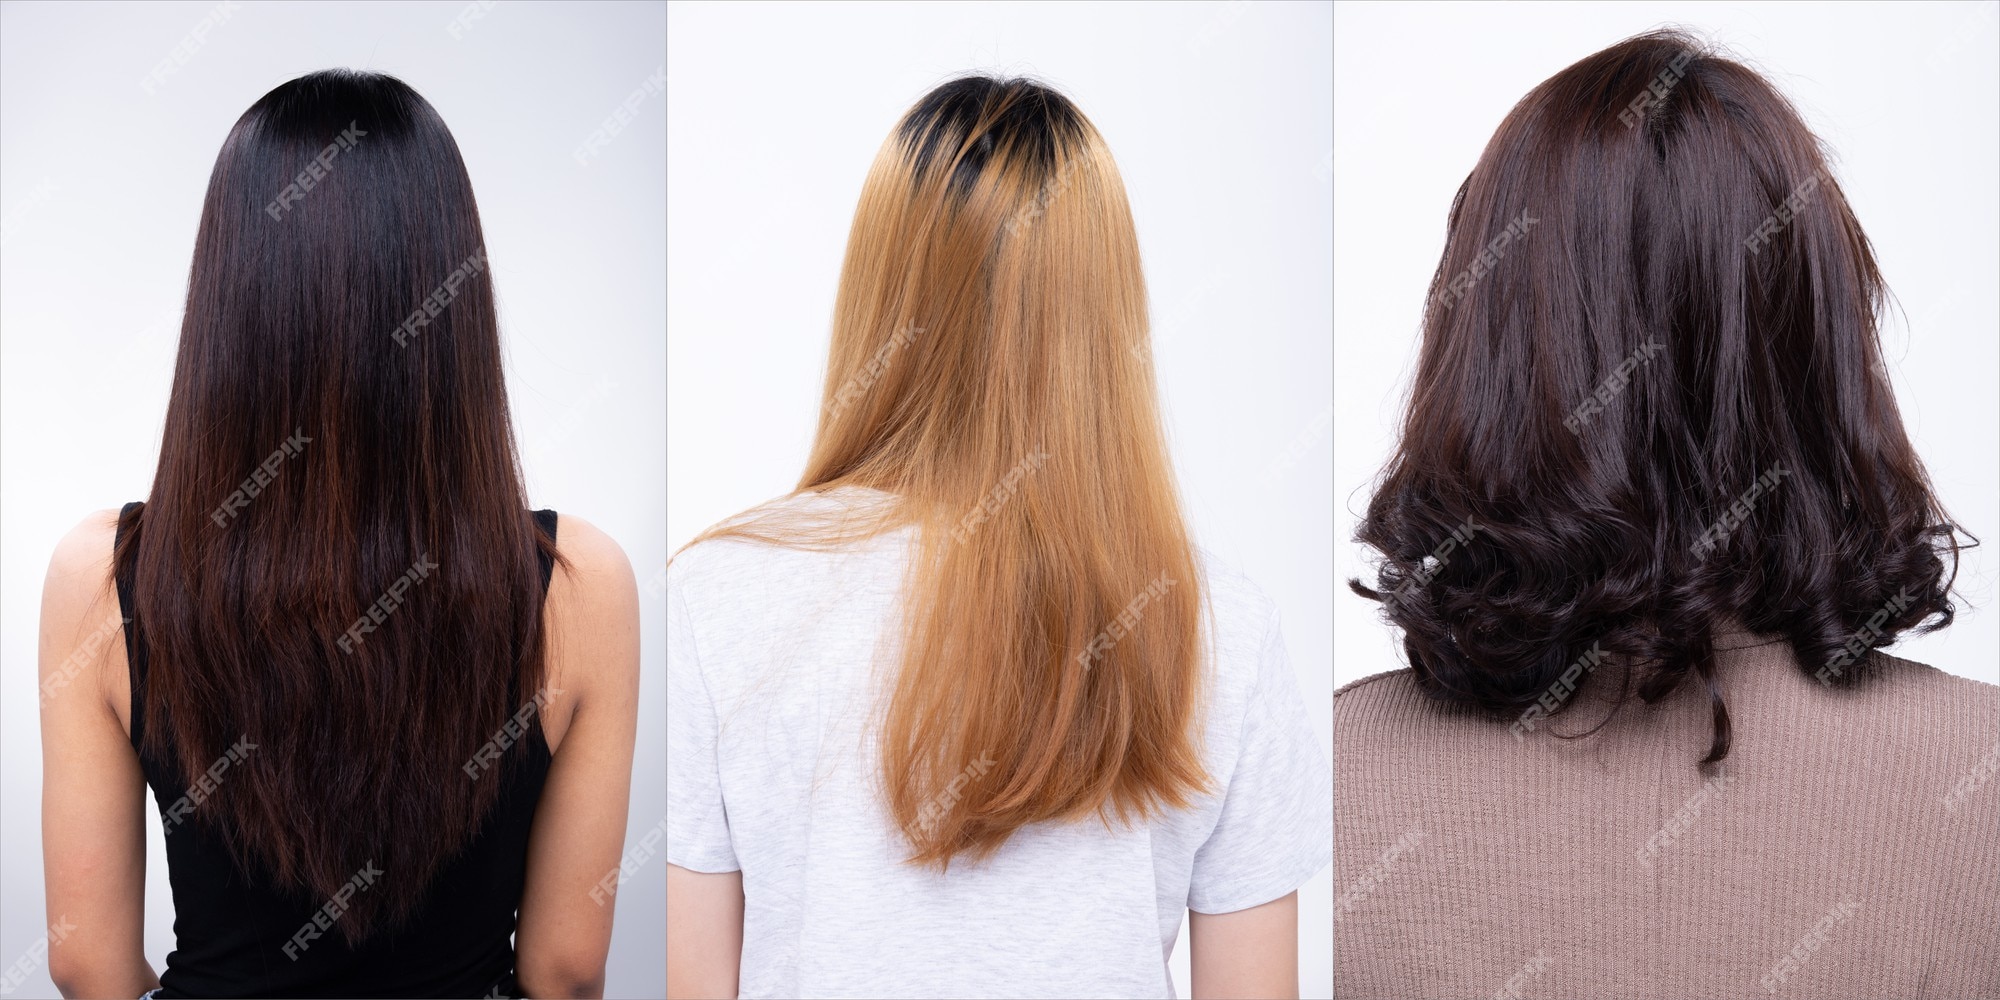 Premium Photo | Collage group pack of back side view to present hair style  of long black, short curl and long blonde hair. studio lighting white  background isolated copyspace